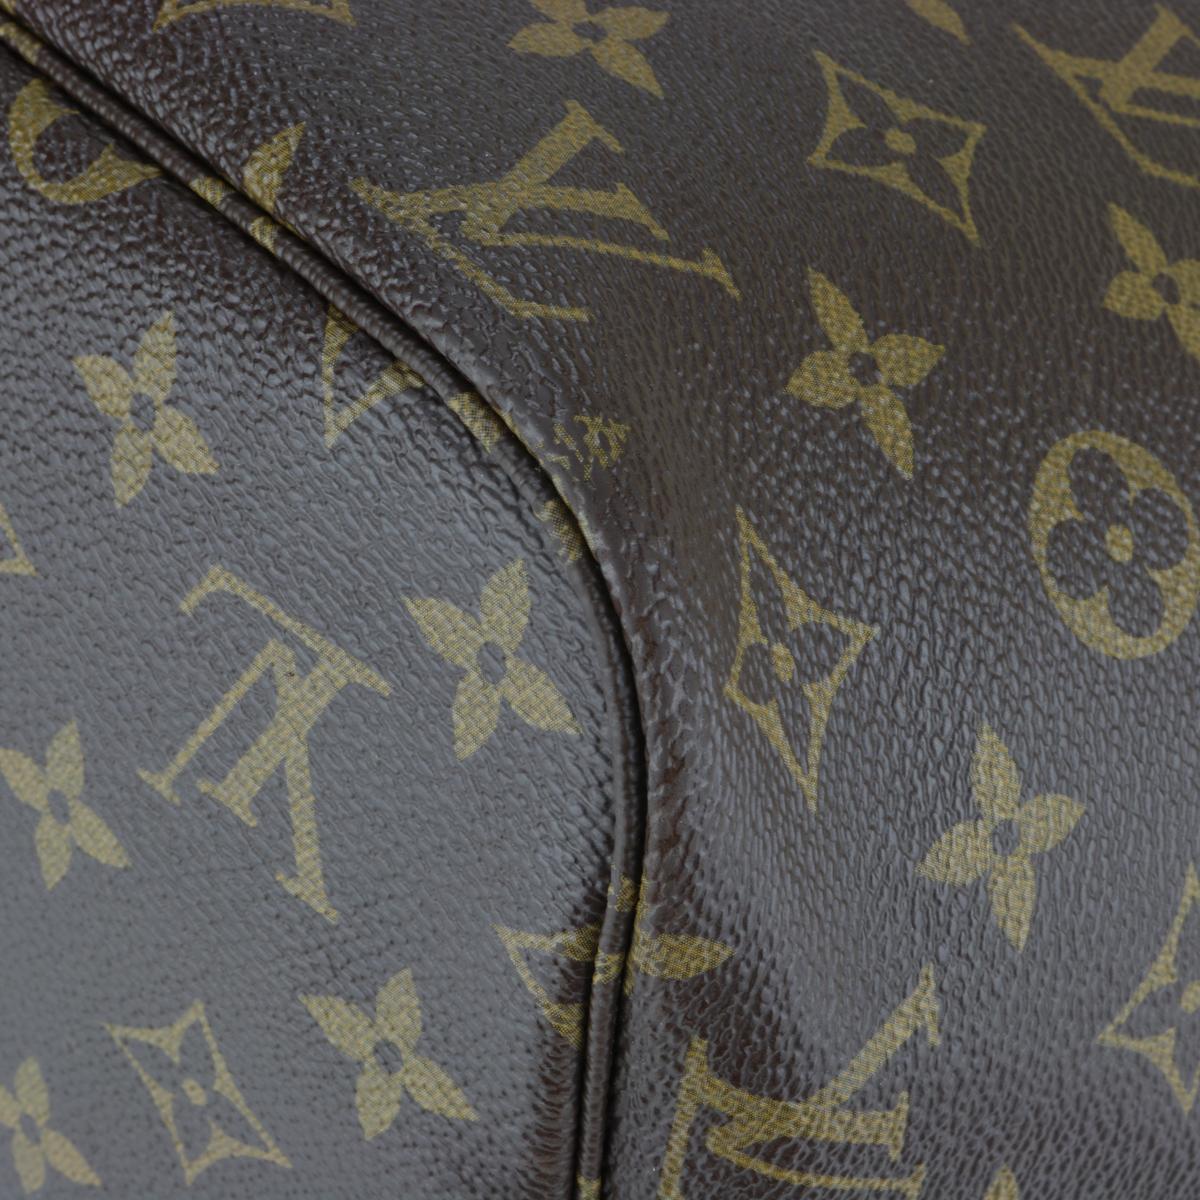 Louis Vuitton Neverfull MM Bag in Monogram with Beige Interior 2014 For Sale 4